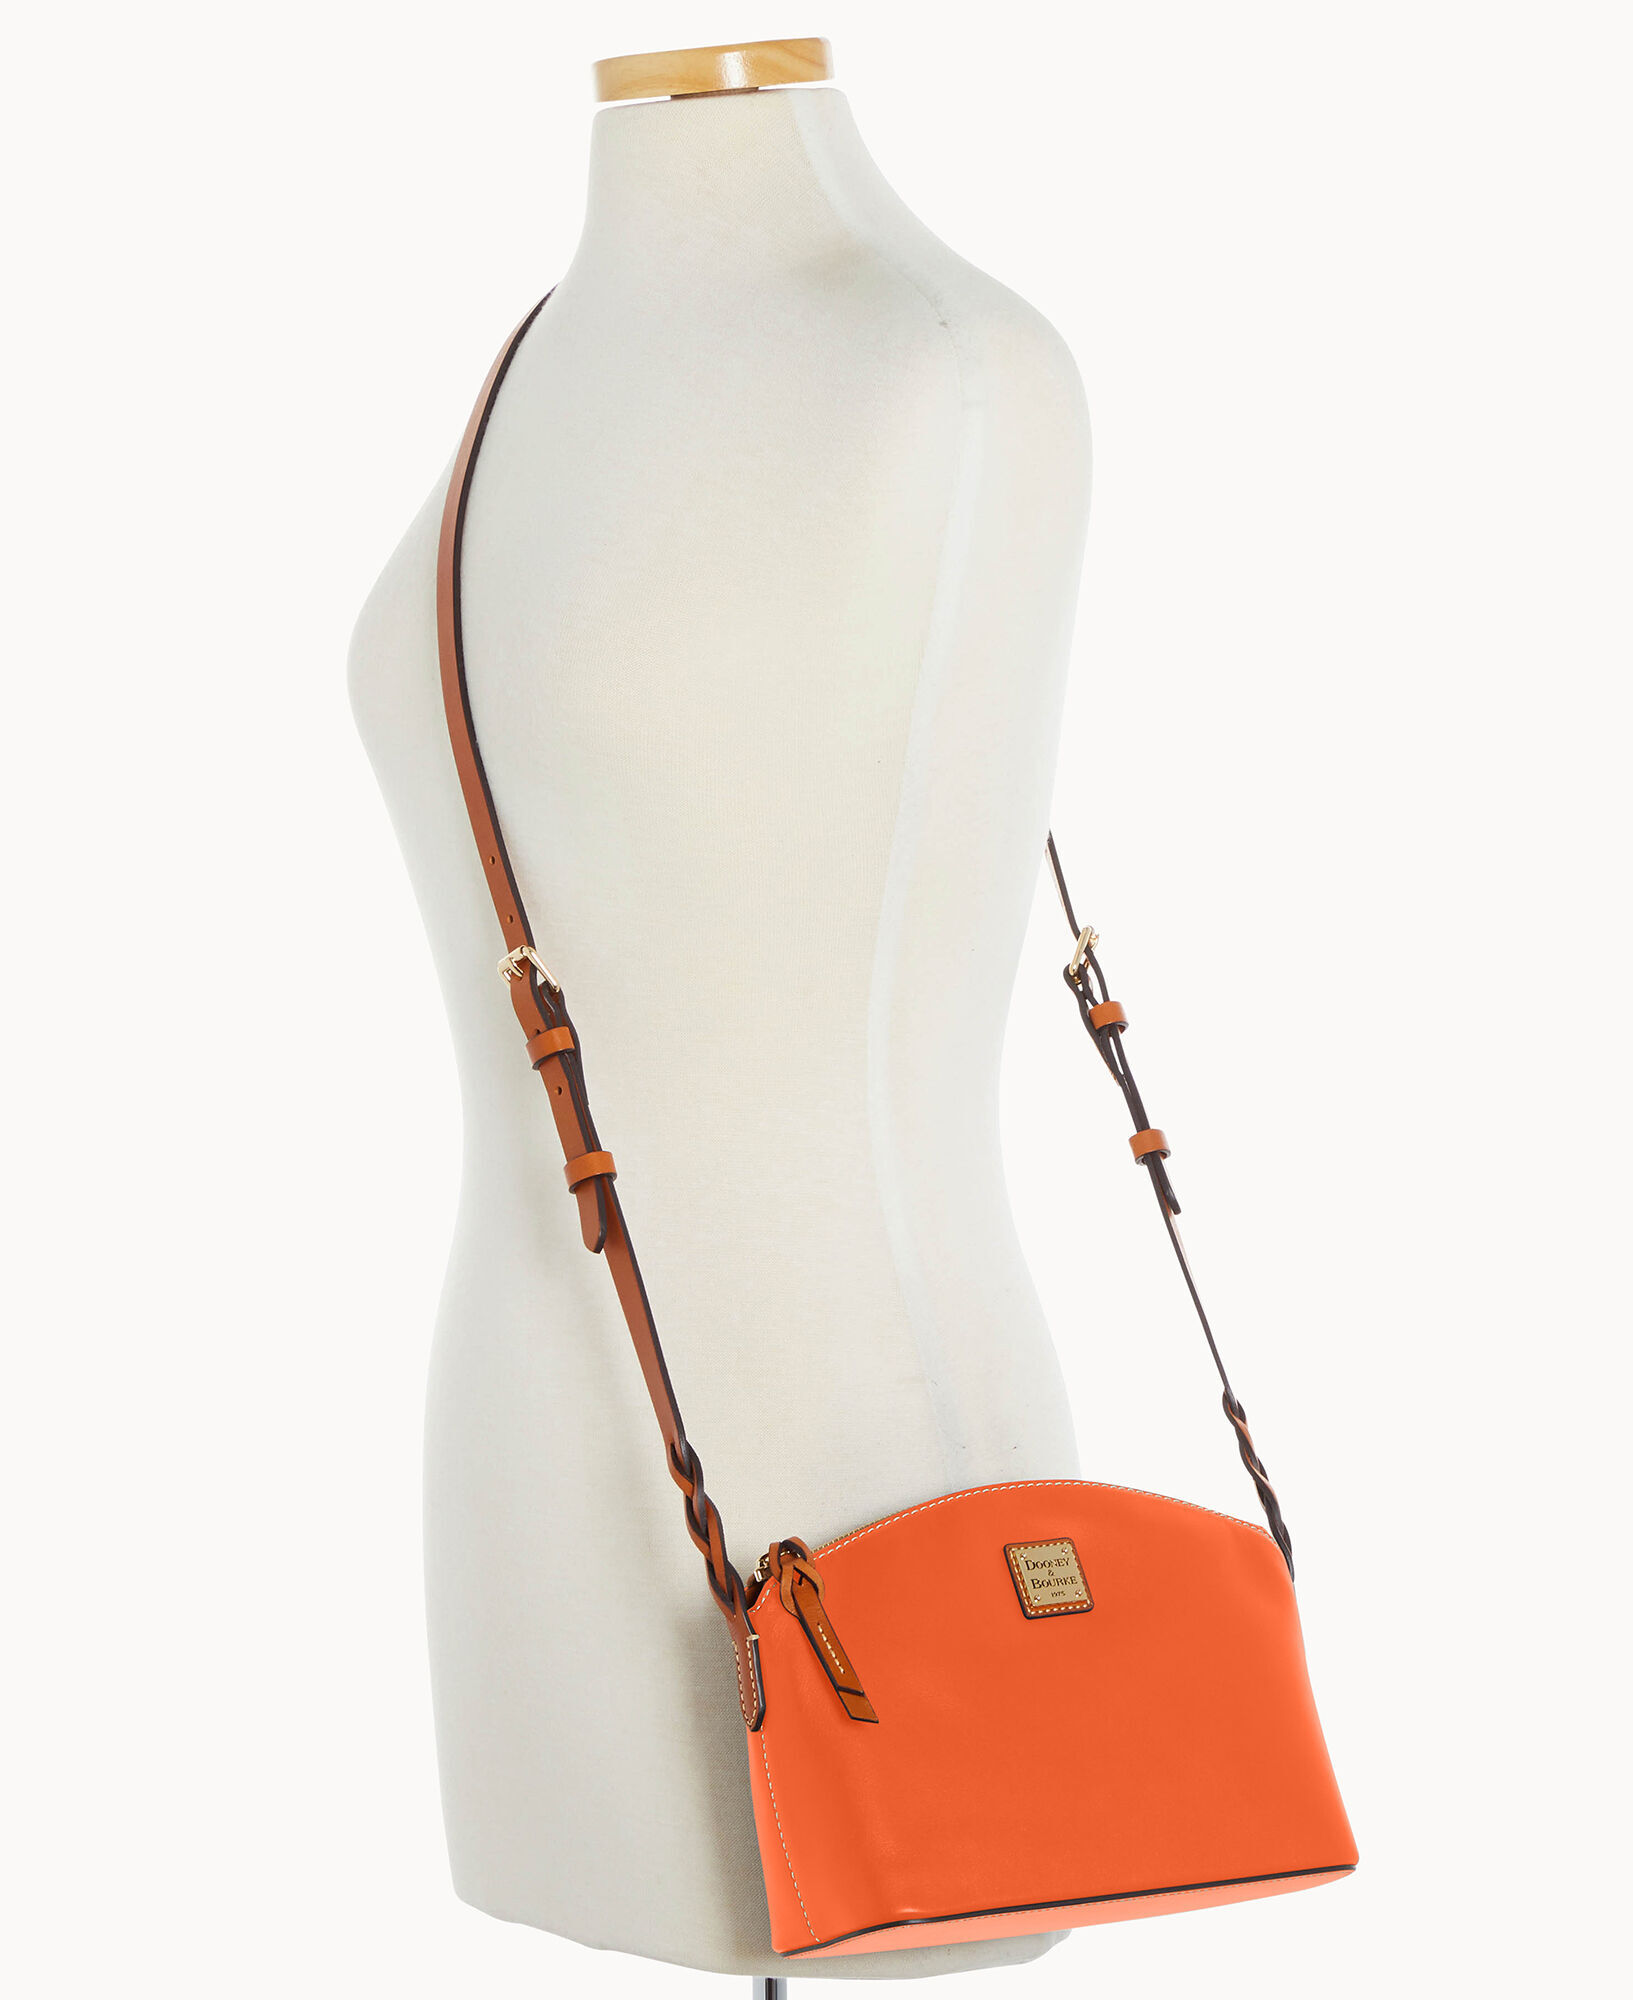 Dome Crossbody With Braided Strap